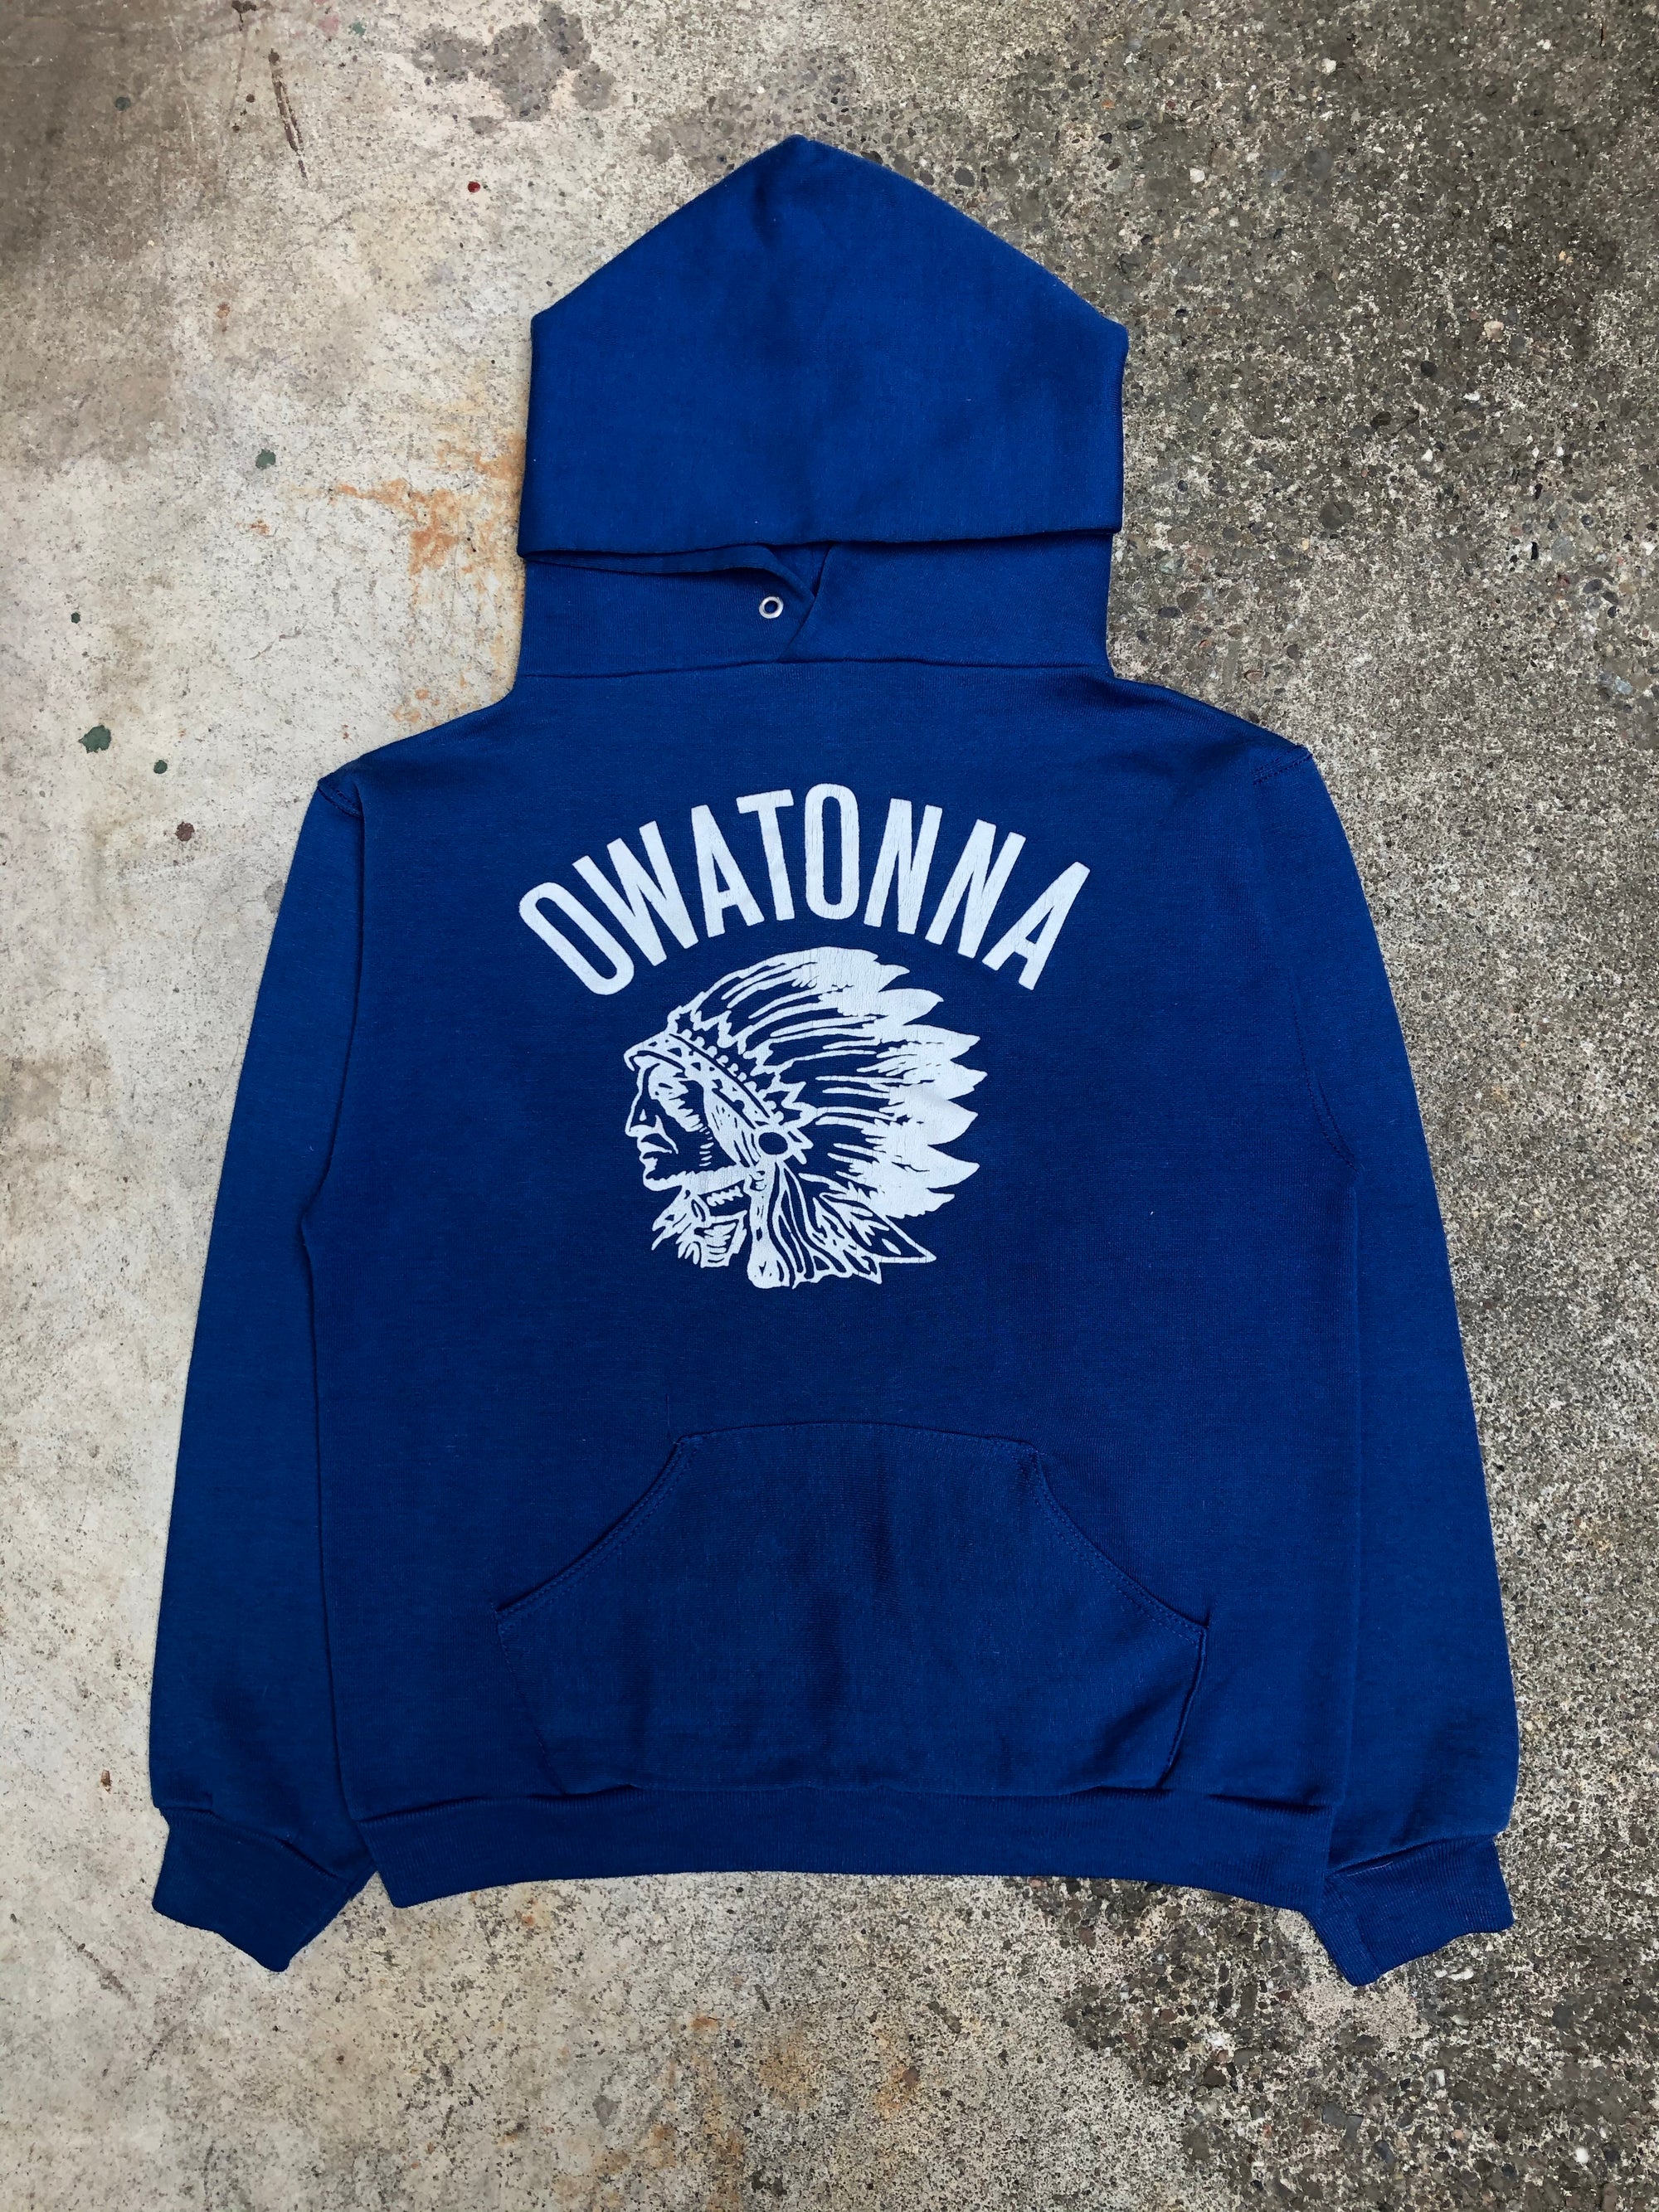 1970s Russell Blue “Owatonna” Hoodie